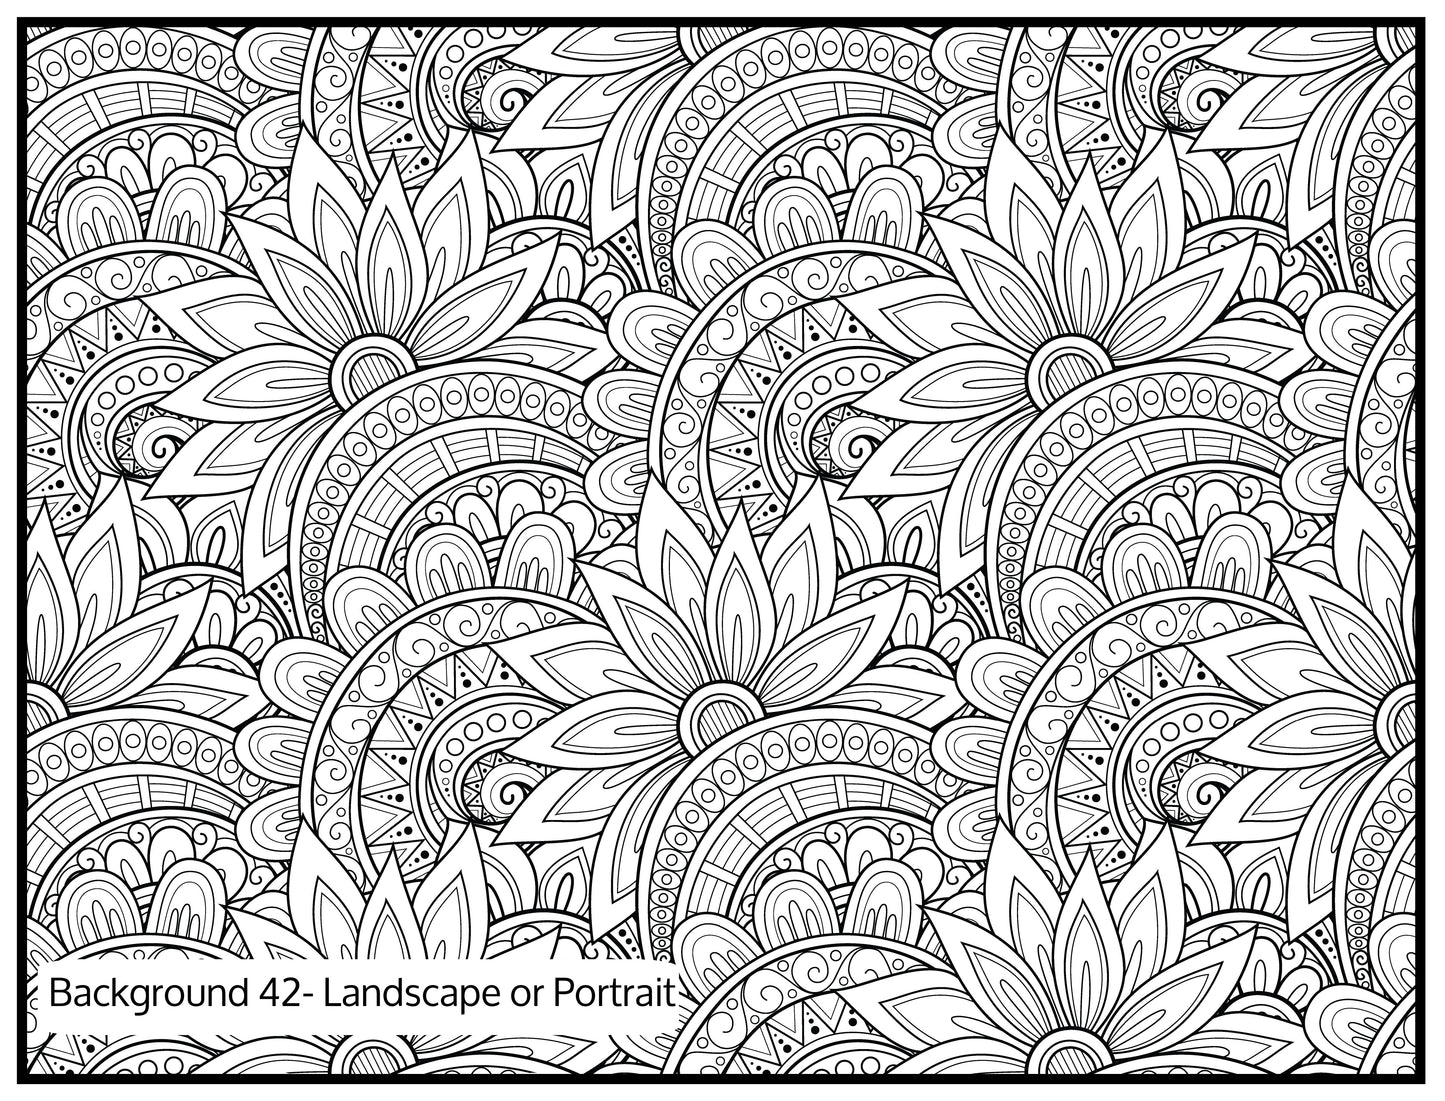 Background 42 Custom Personalized Giant Coloring Poster 46"x60"